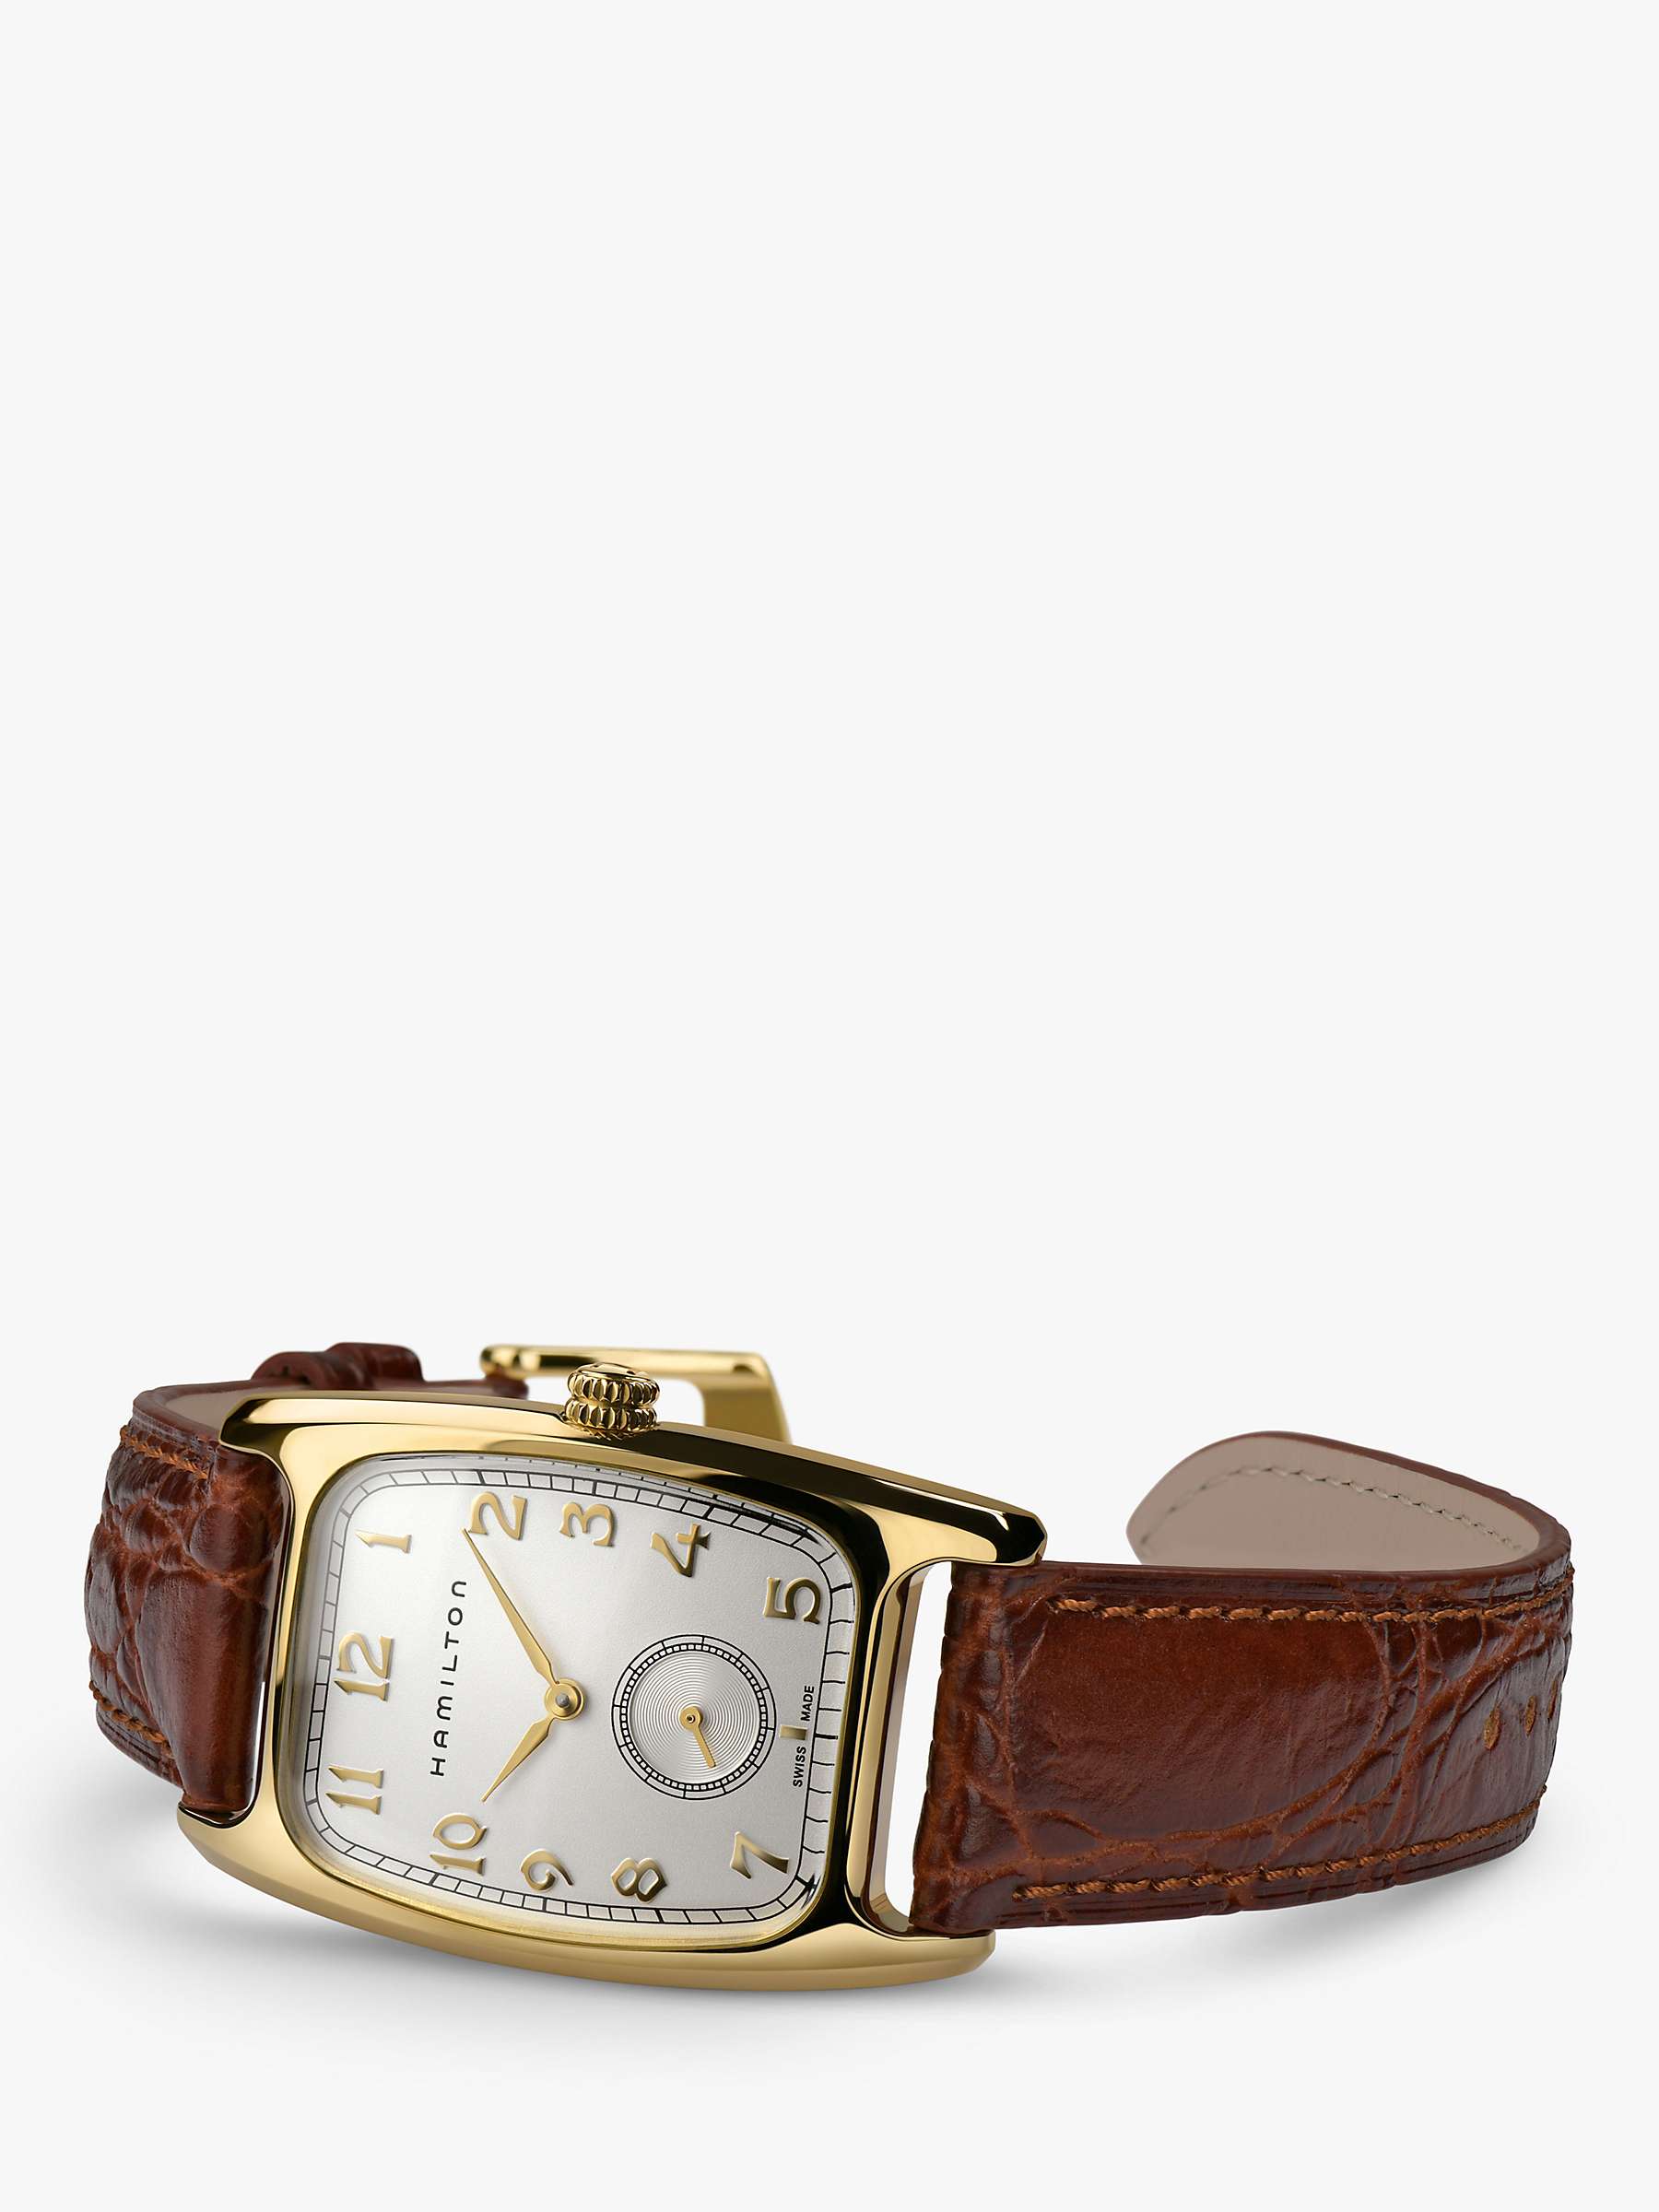 Buy Hamilton x Indiana Jones H13431553 Unisex American Classic Boulton Small Second Leather Strap Watch, Brown/Gold Online at johnlewis.com